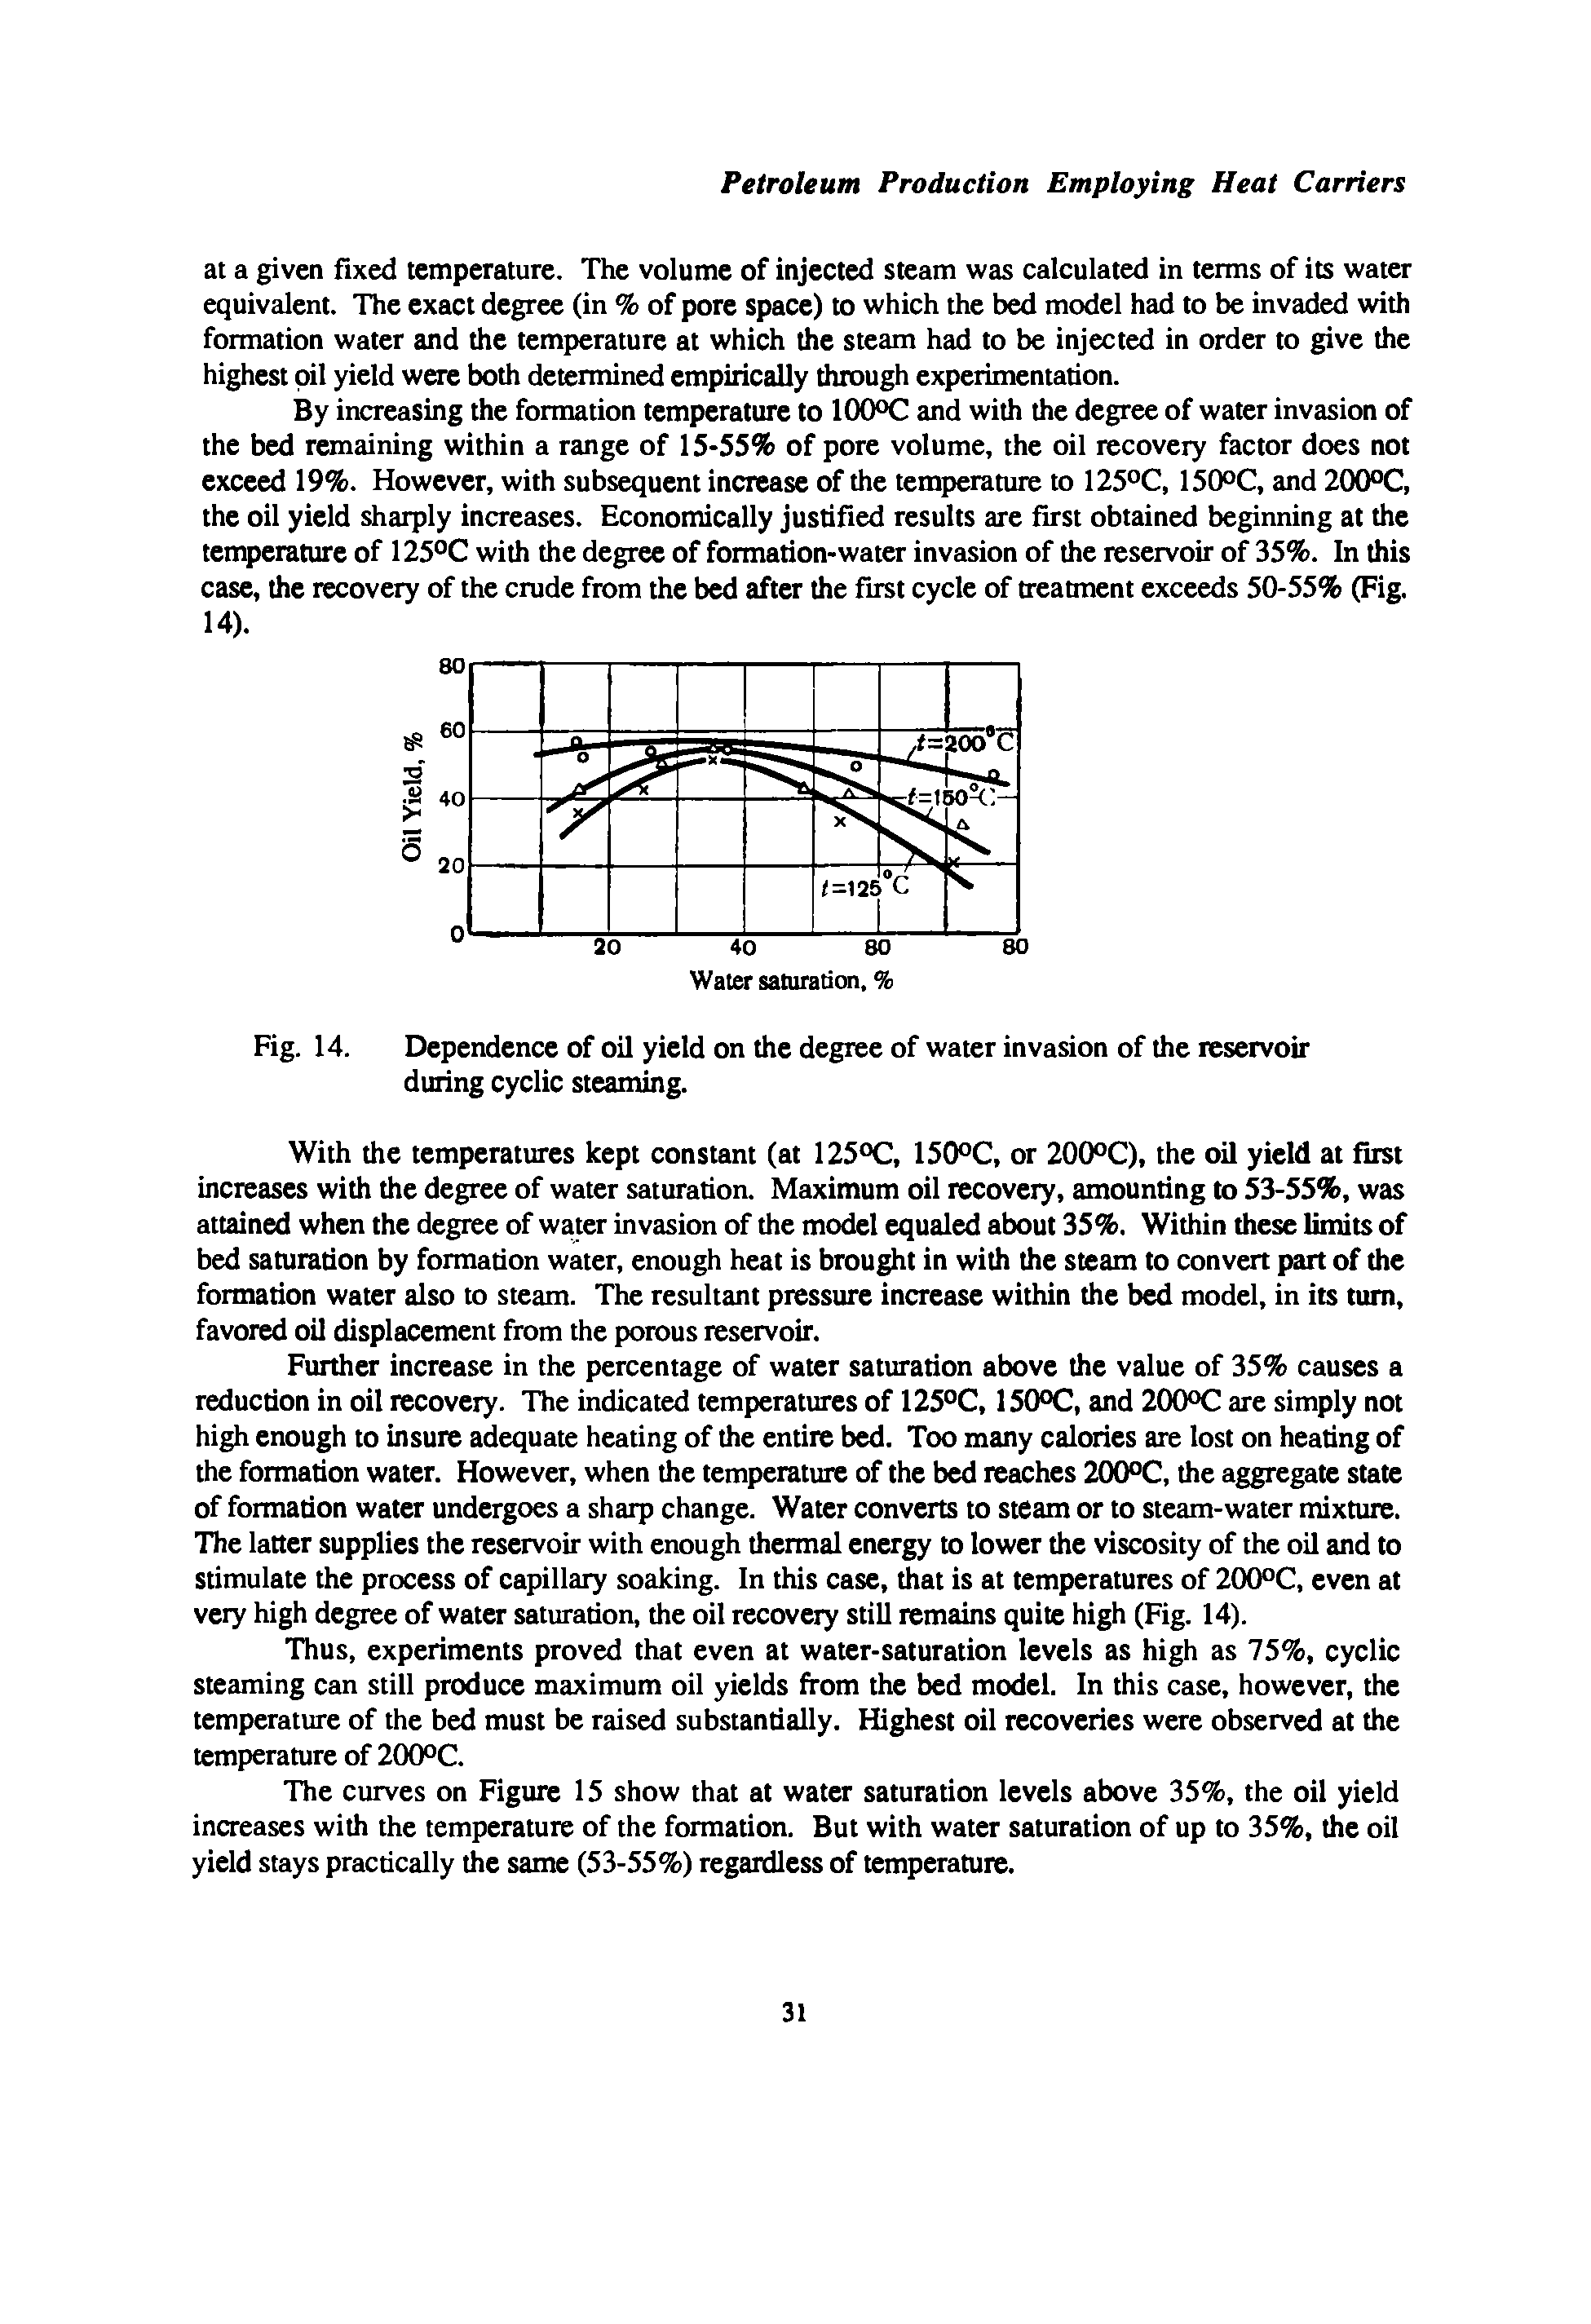 Fig. 14. Dependence of oil yield on the degree of water invasion of the reservoir during cyclic steaming.